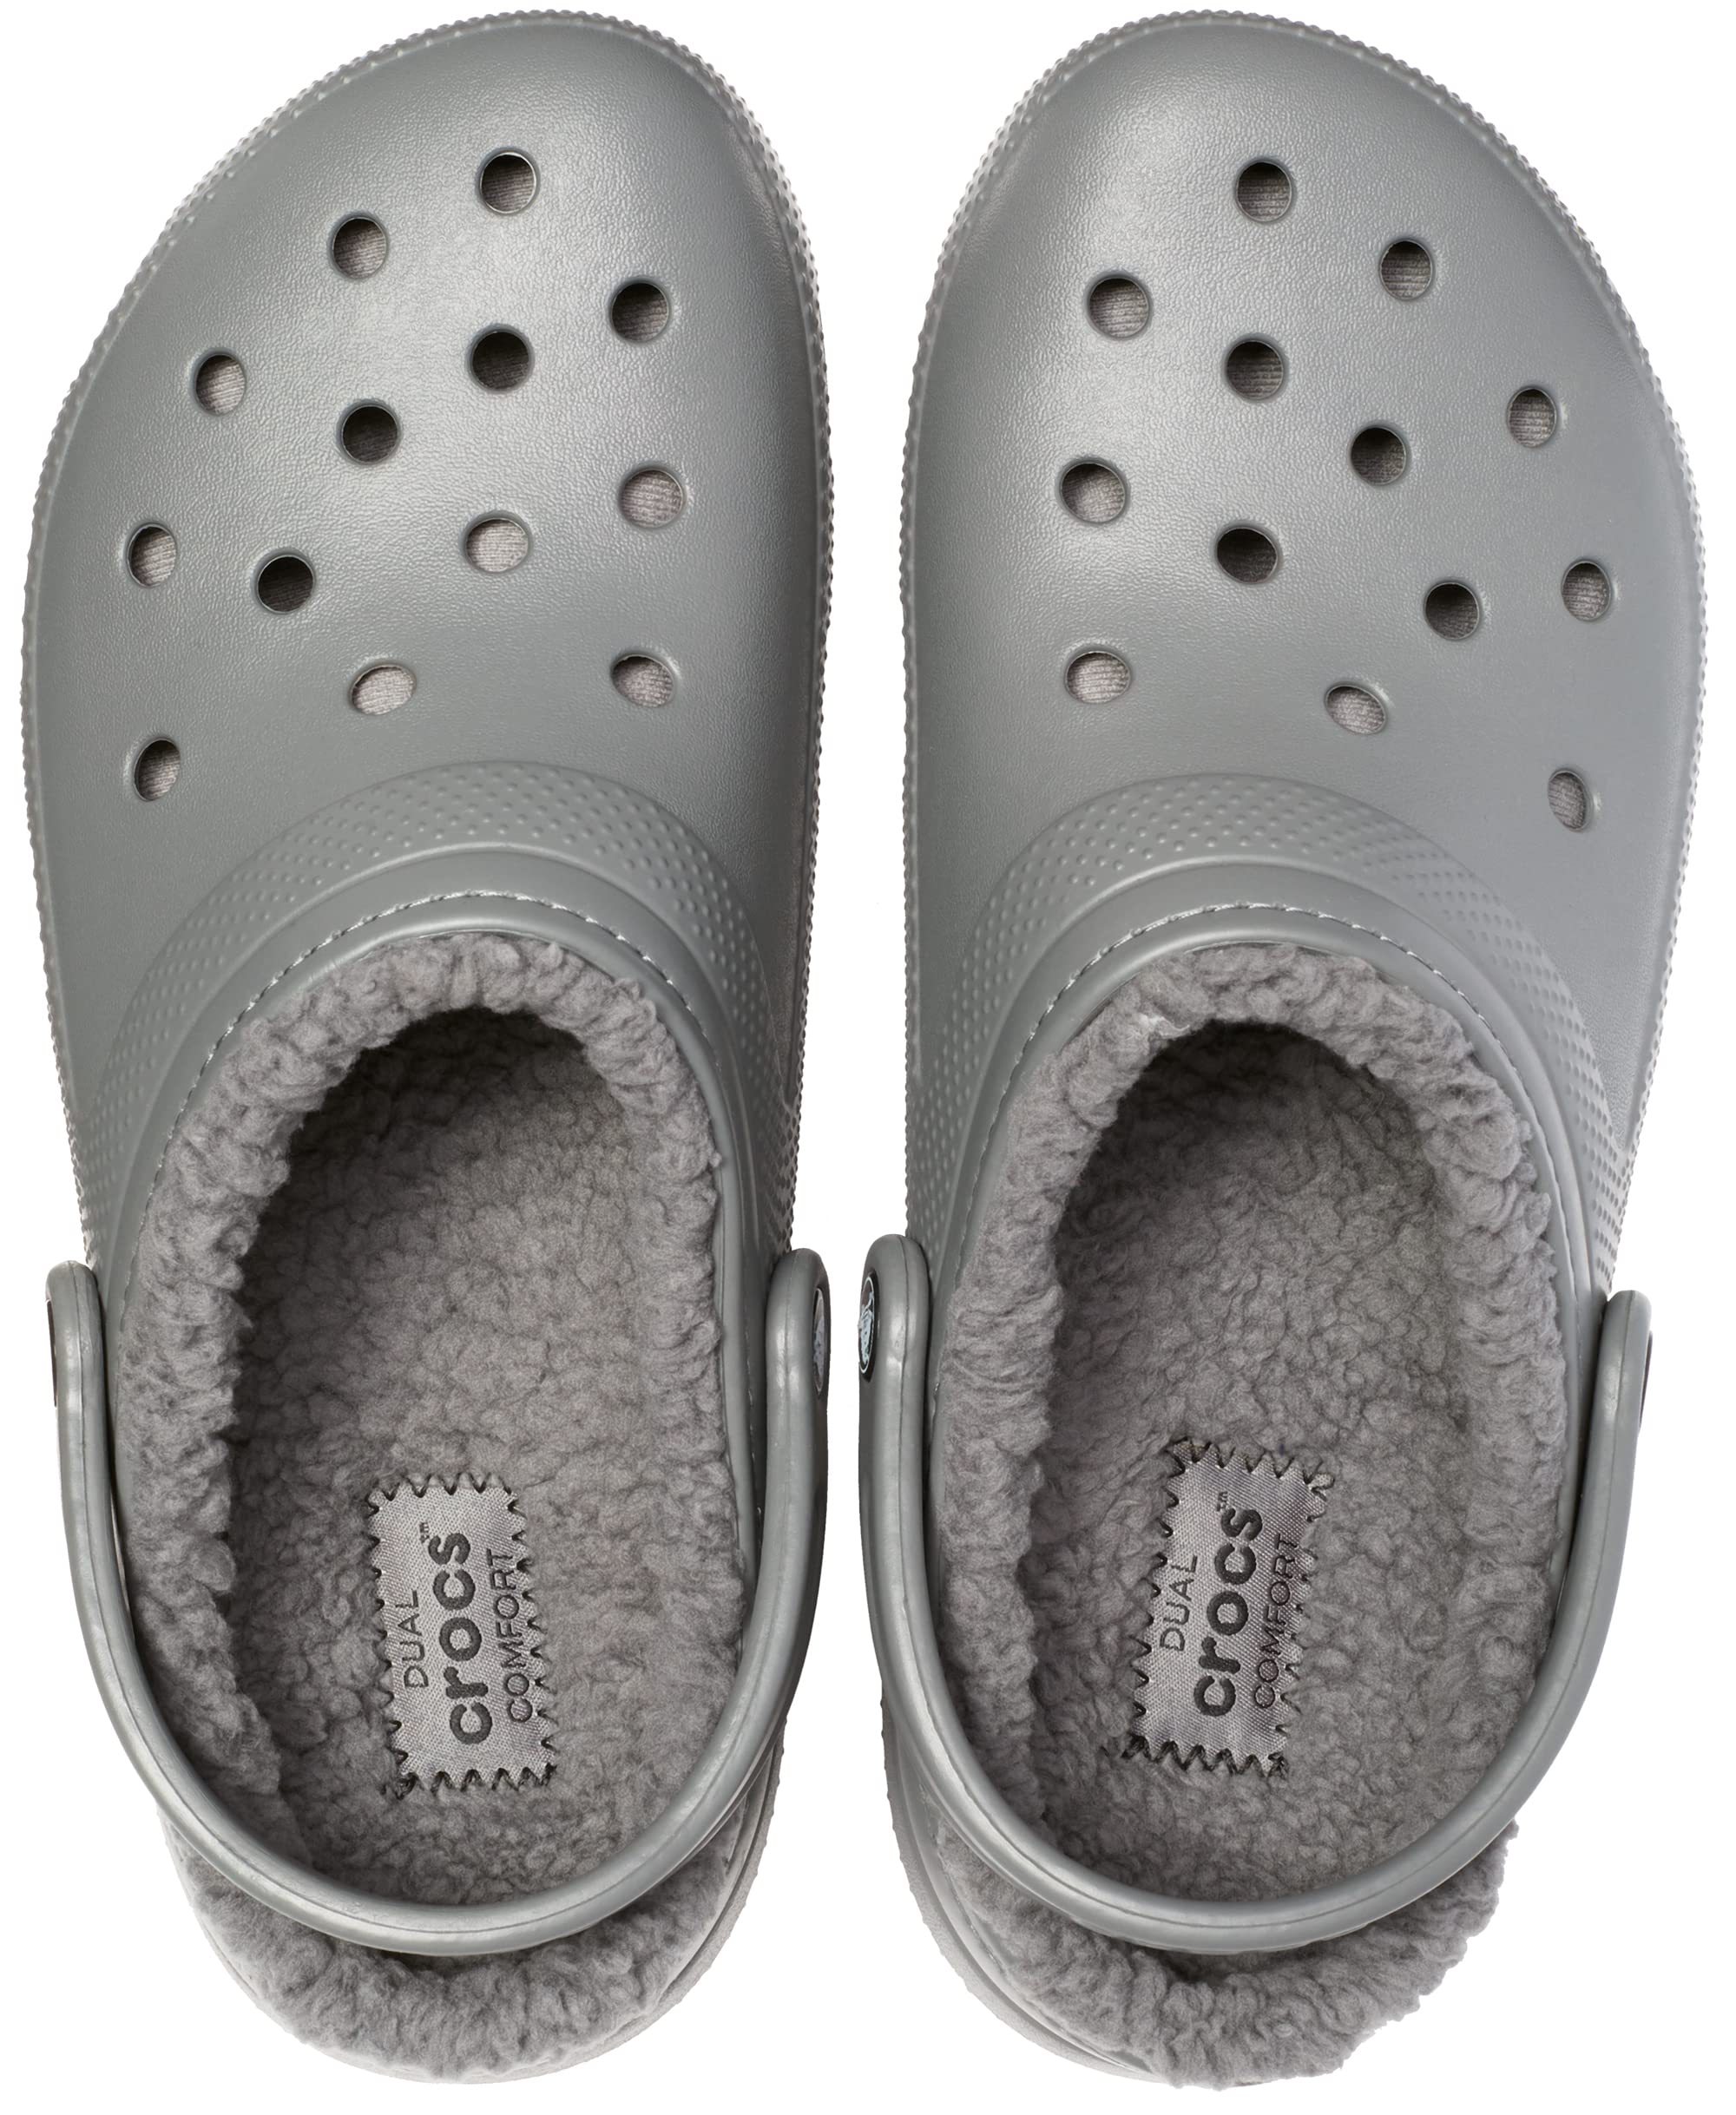 Crocs Unisex-Adult Men's and Women's Classic Lined Clog | Fuzzy Slippers